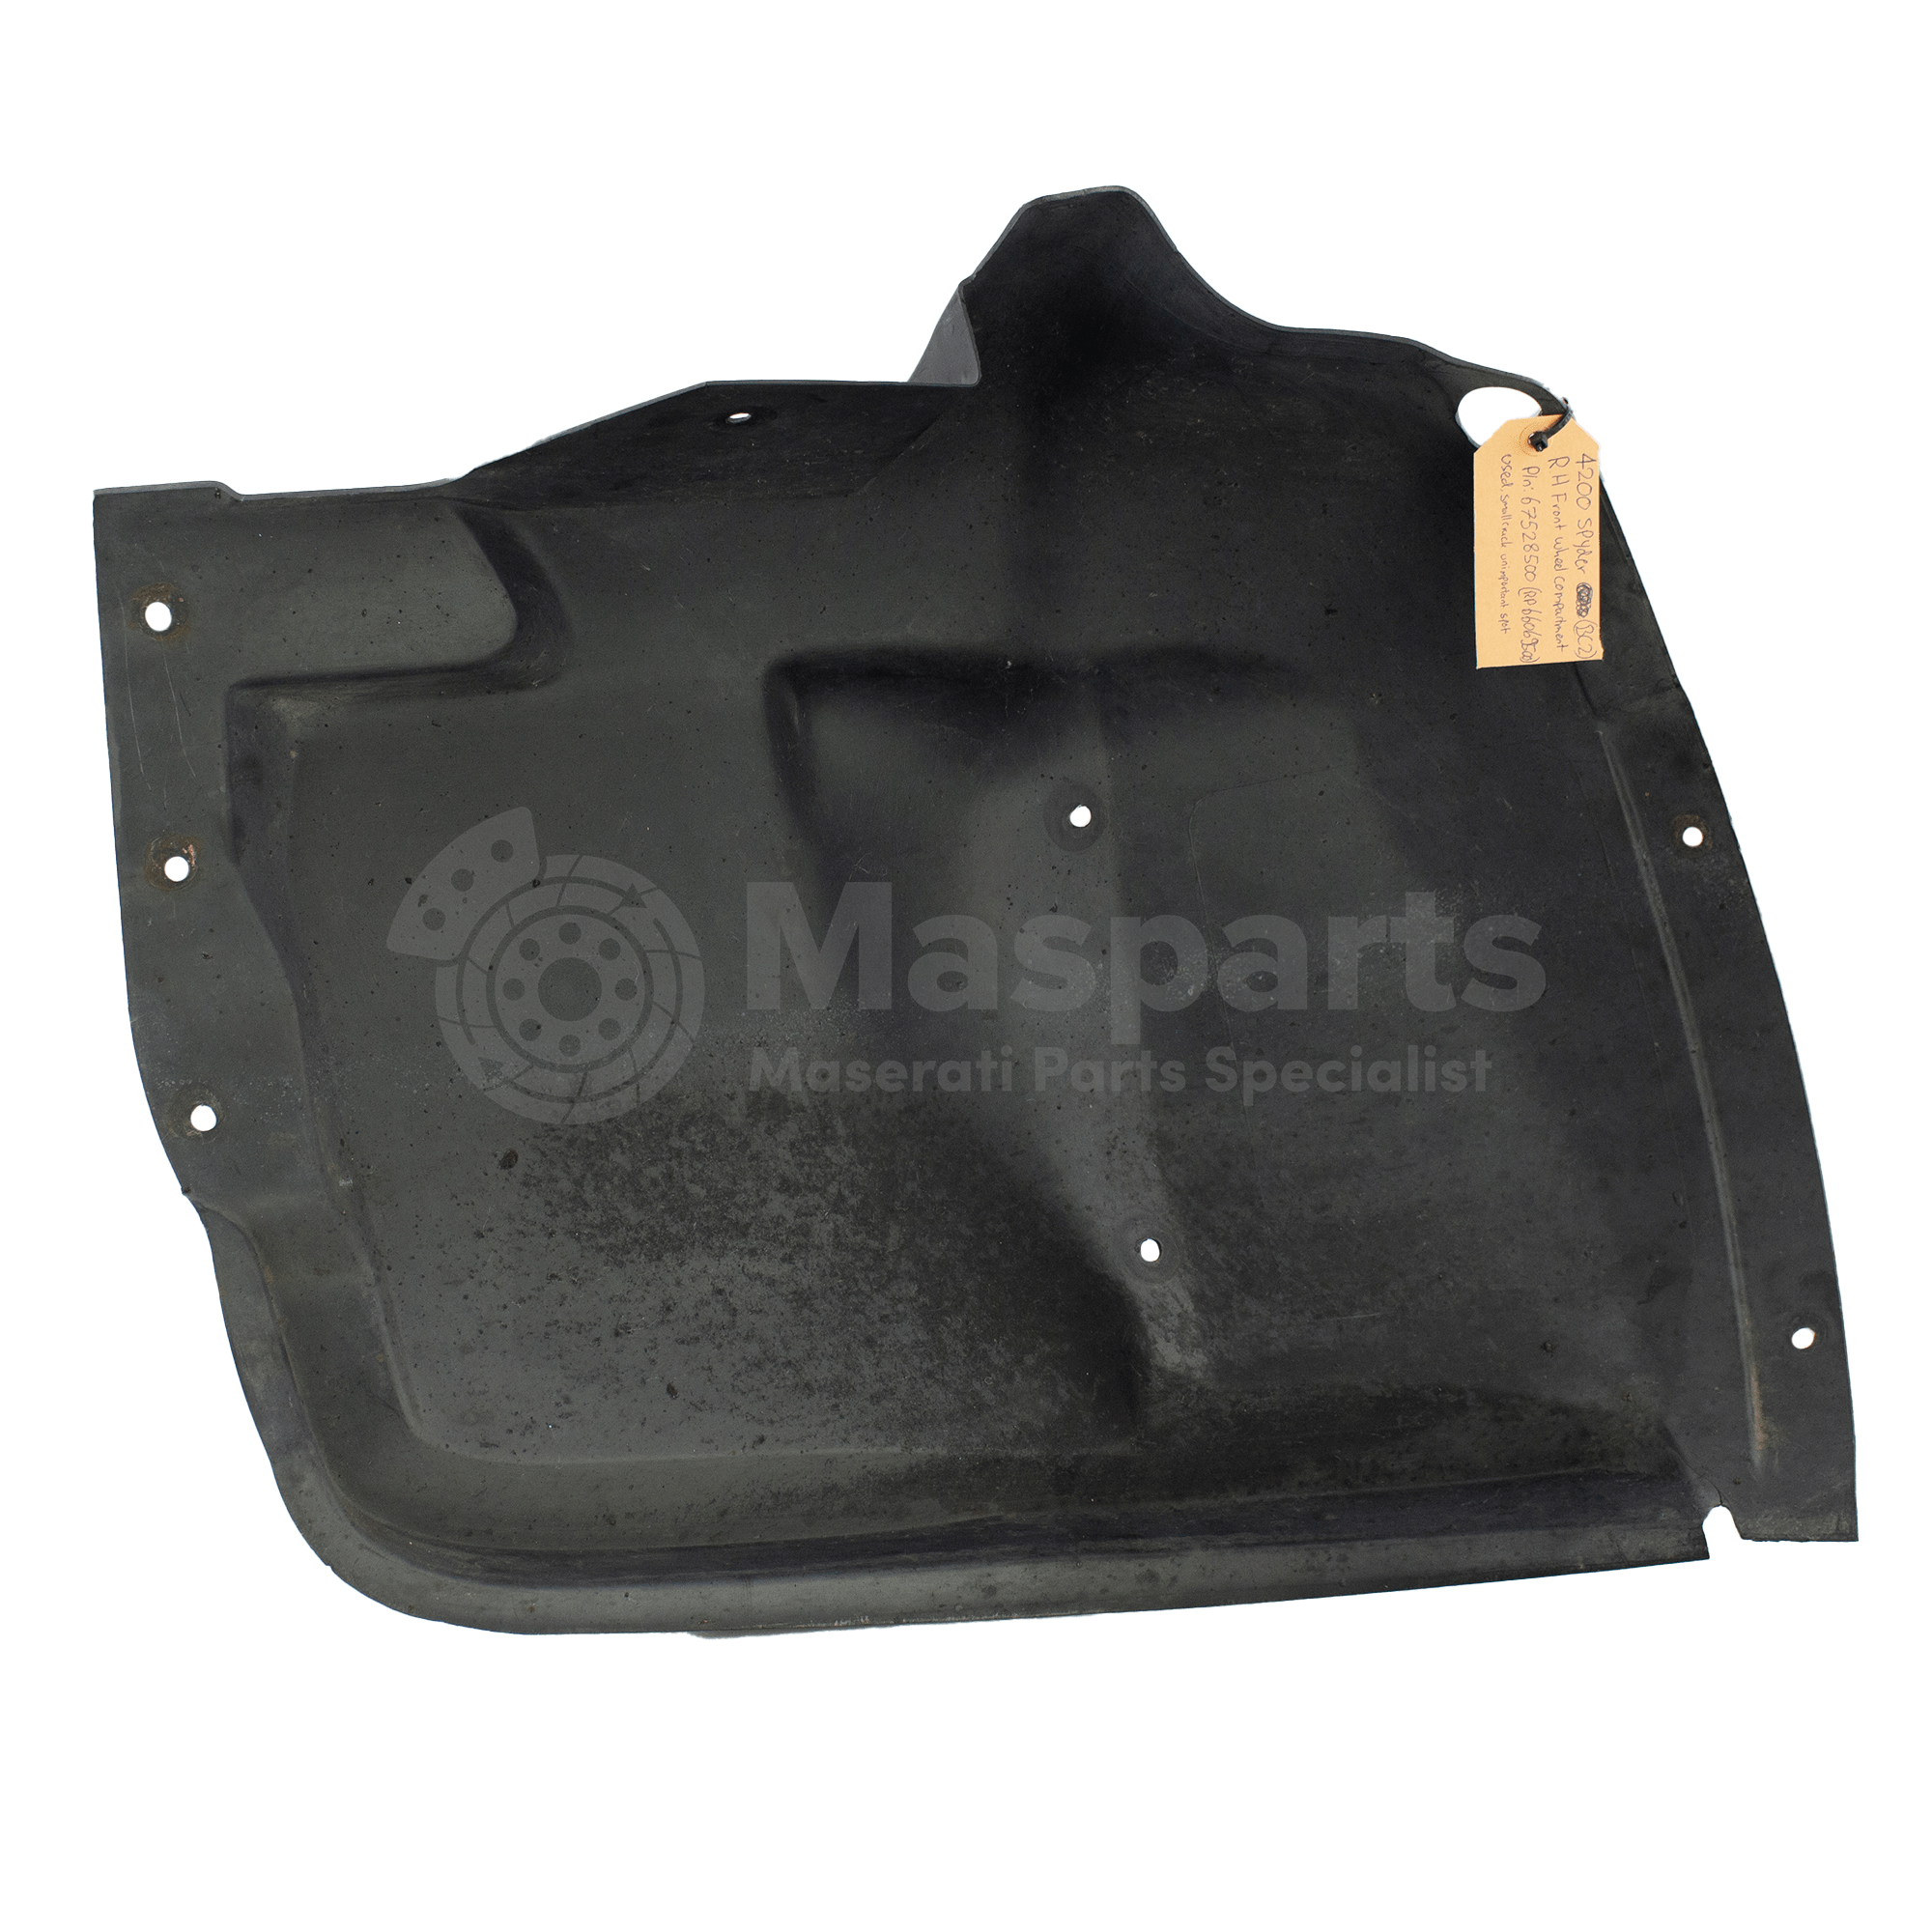 Maserati 4200 GT Front Wheel Compartment 67528500 (RP 66069500)